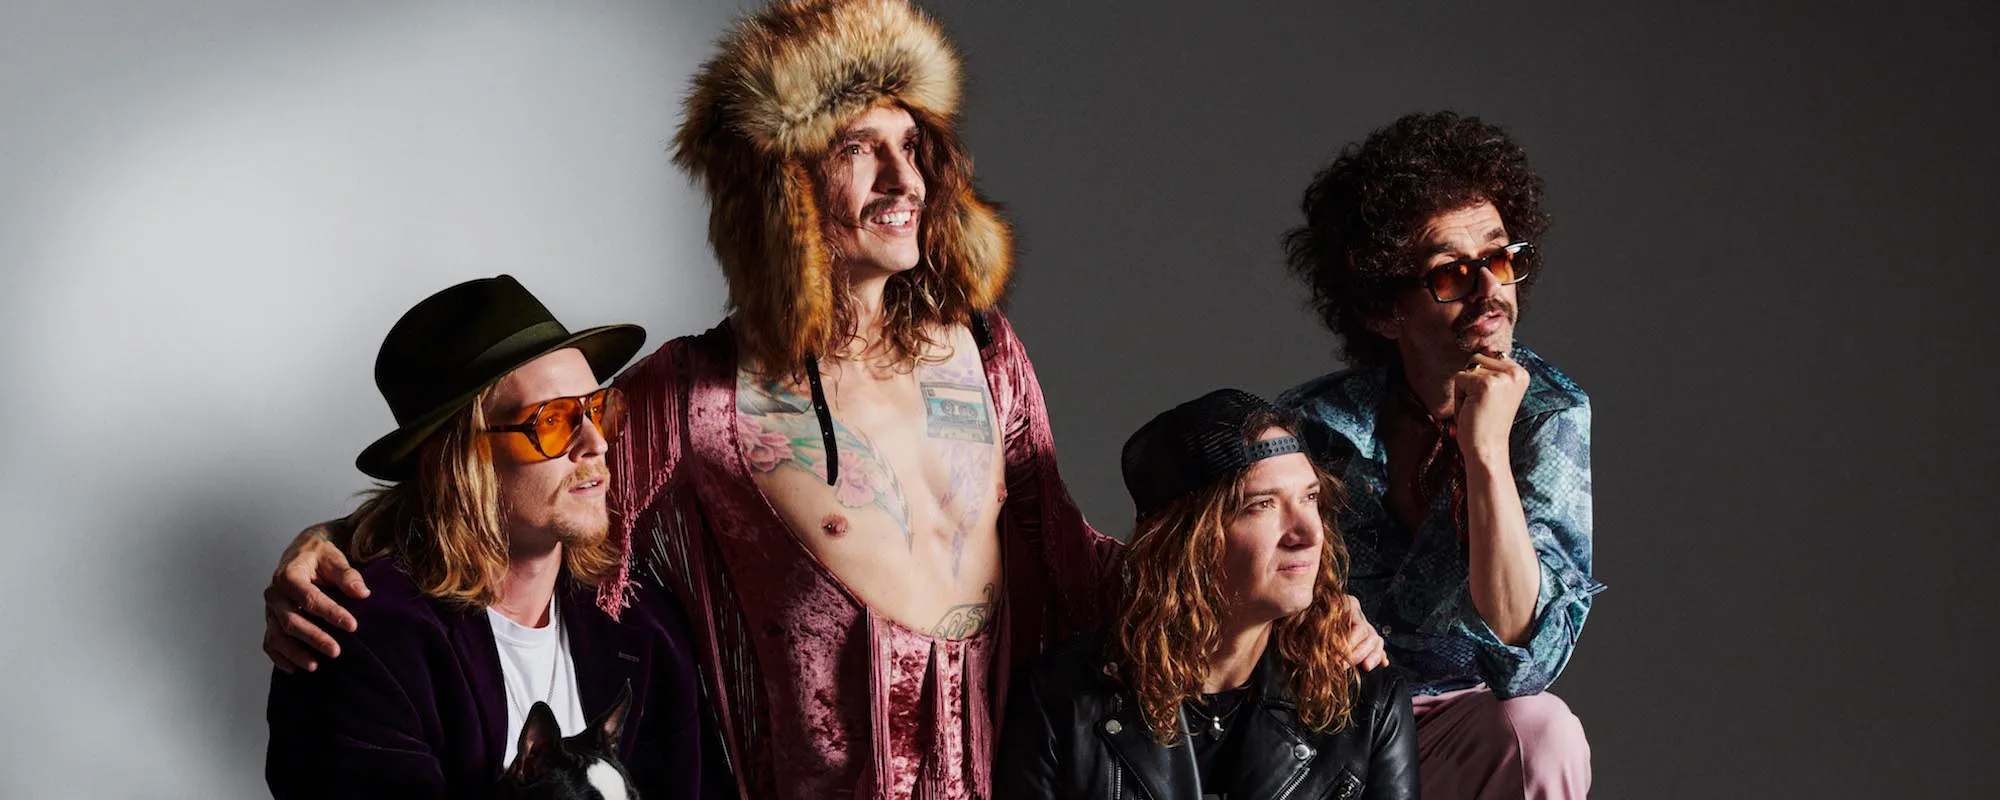 The Darkness Celebrate 20 Years of ‘Permission to Land’ with North American Tour